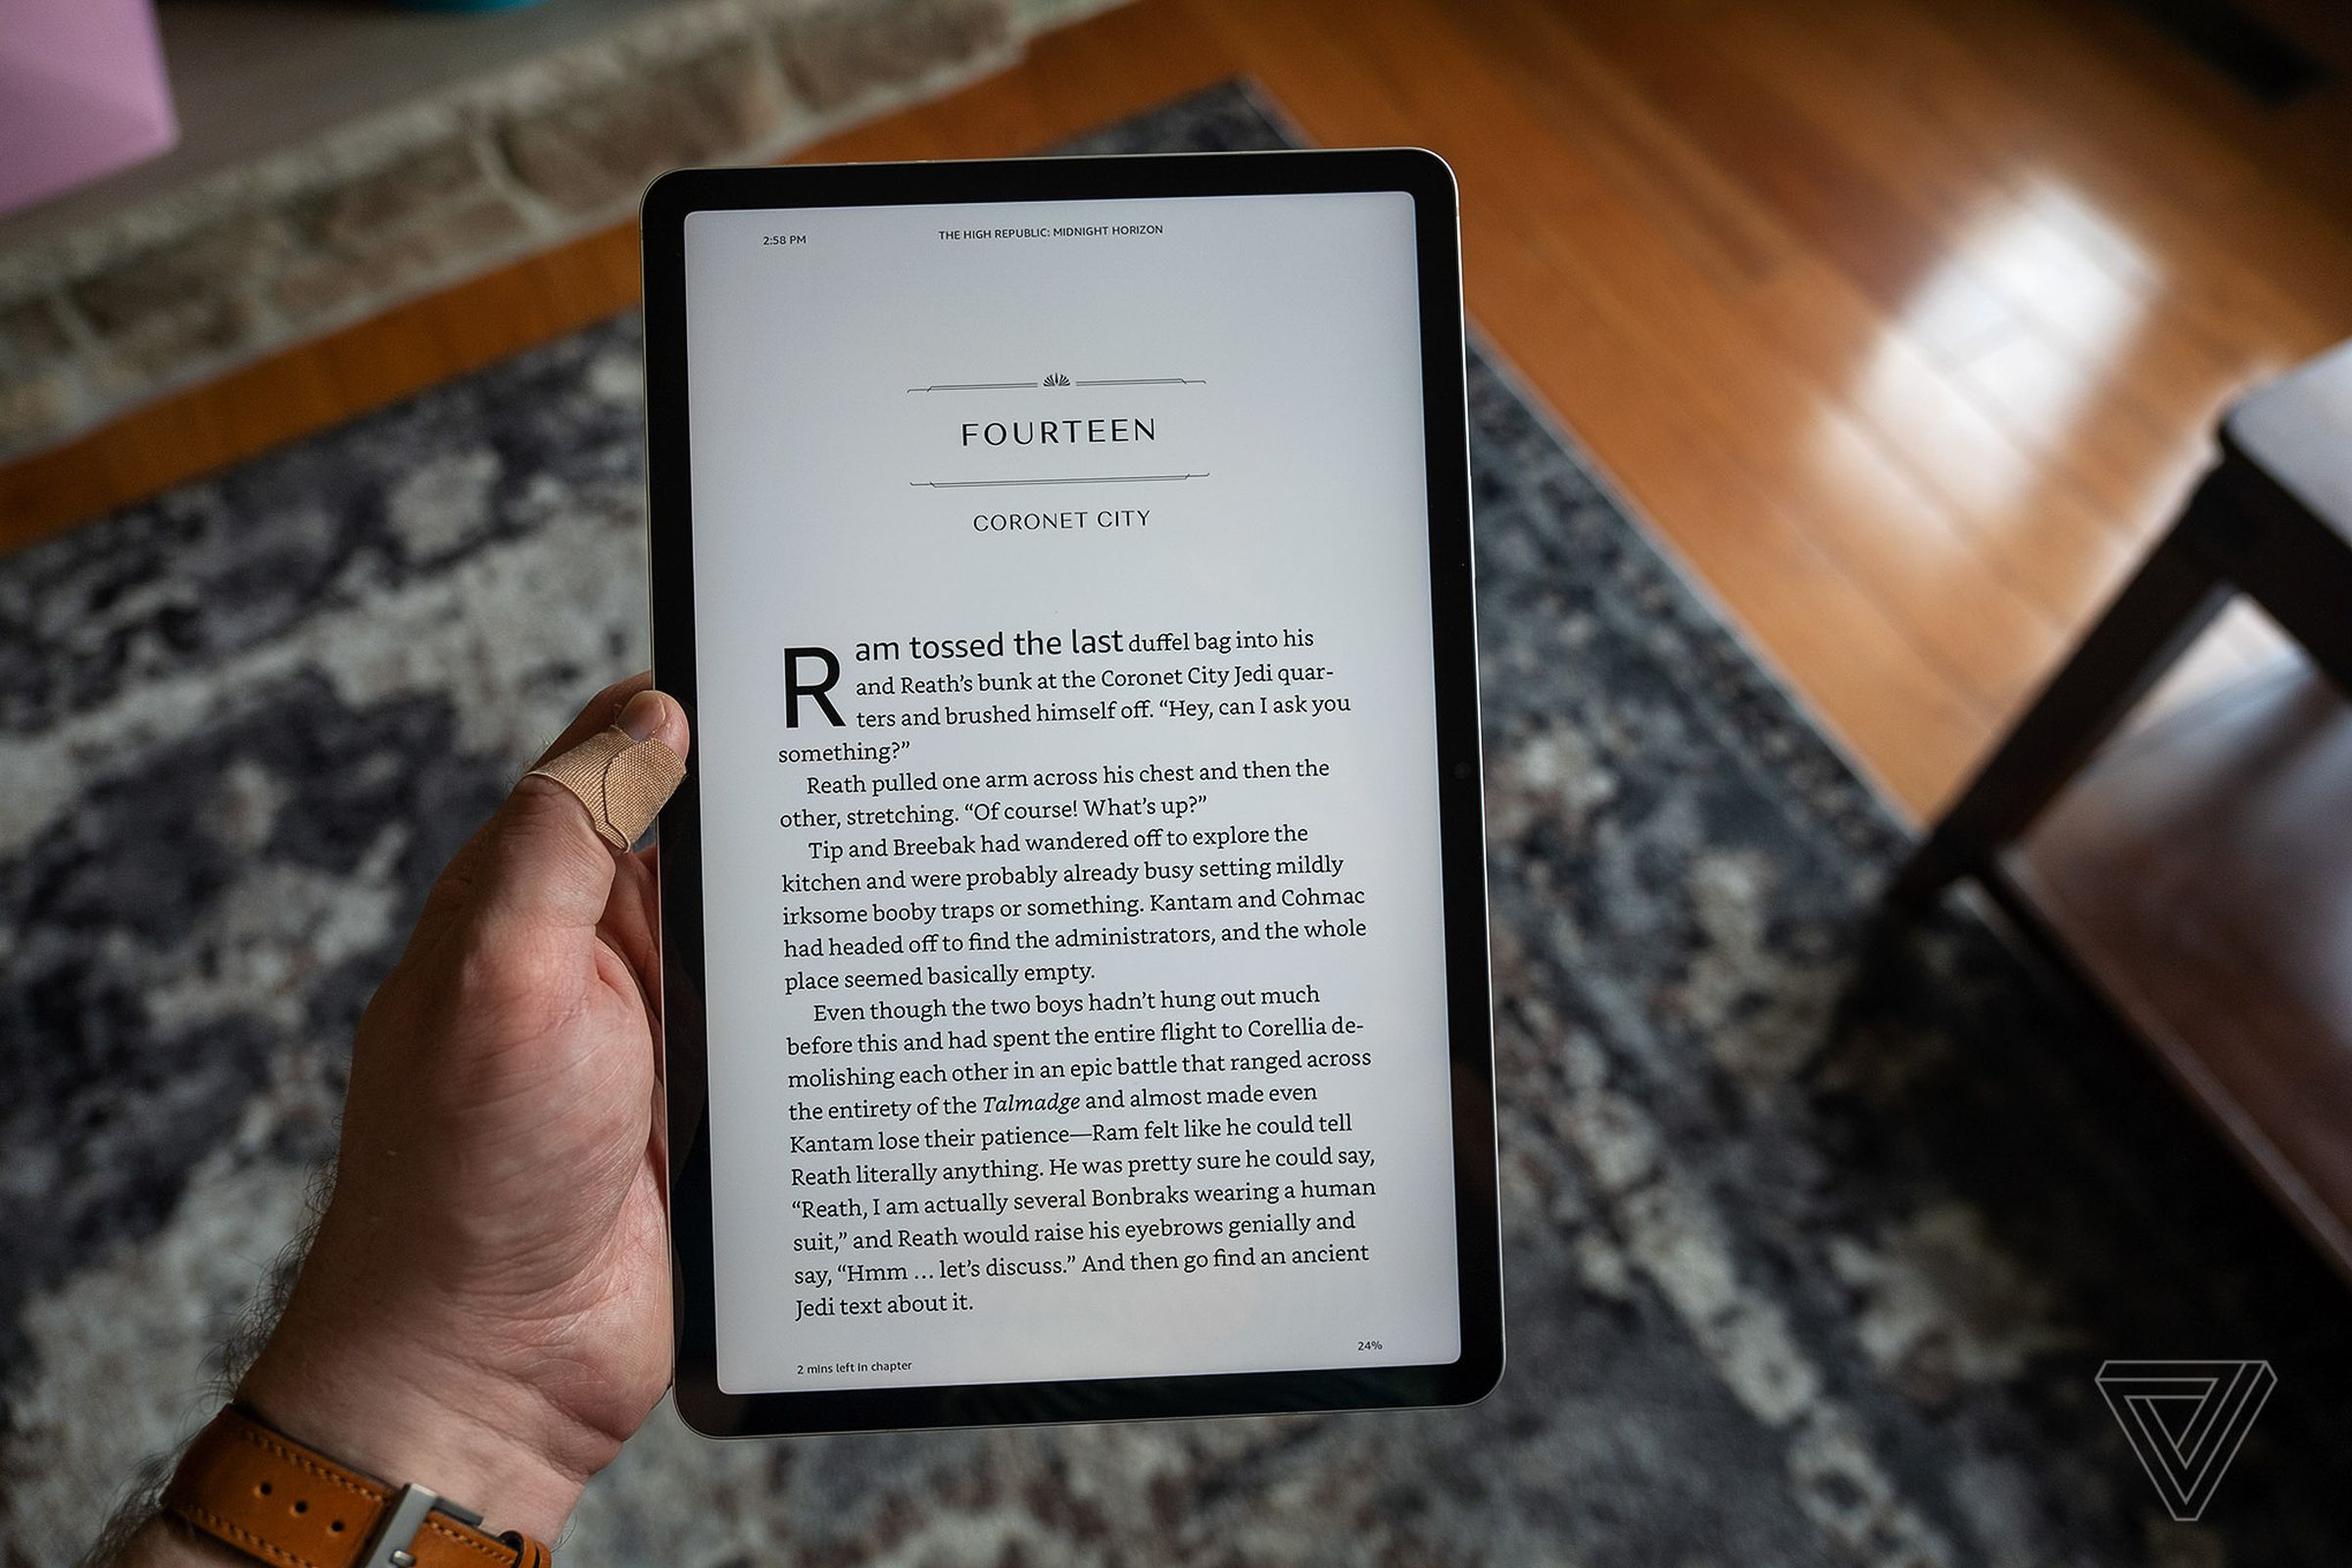 The Tab S8’s smaller size makes it more suited for tablet-style tasks, such as reading ebooks.